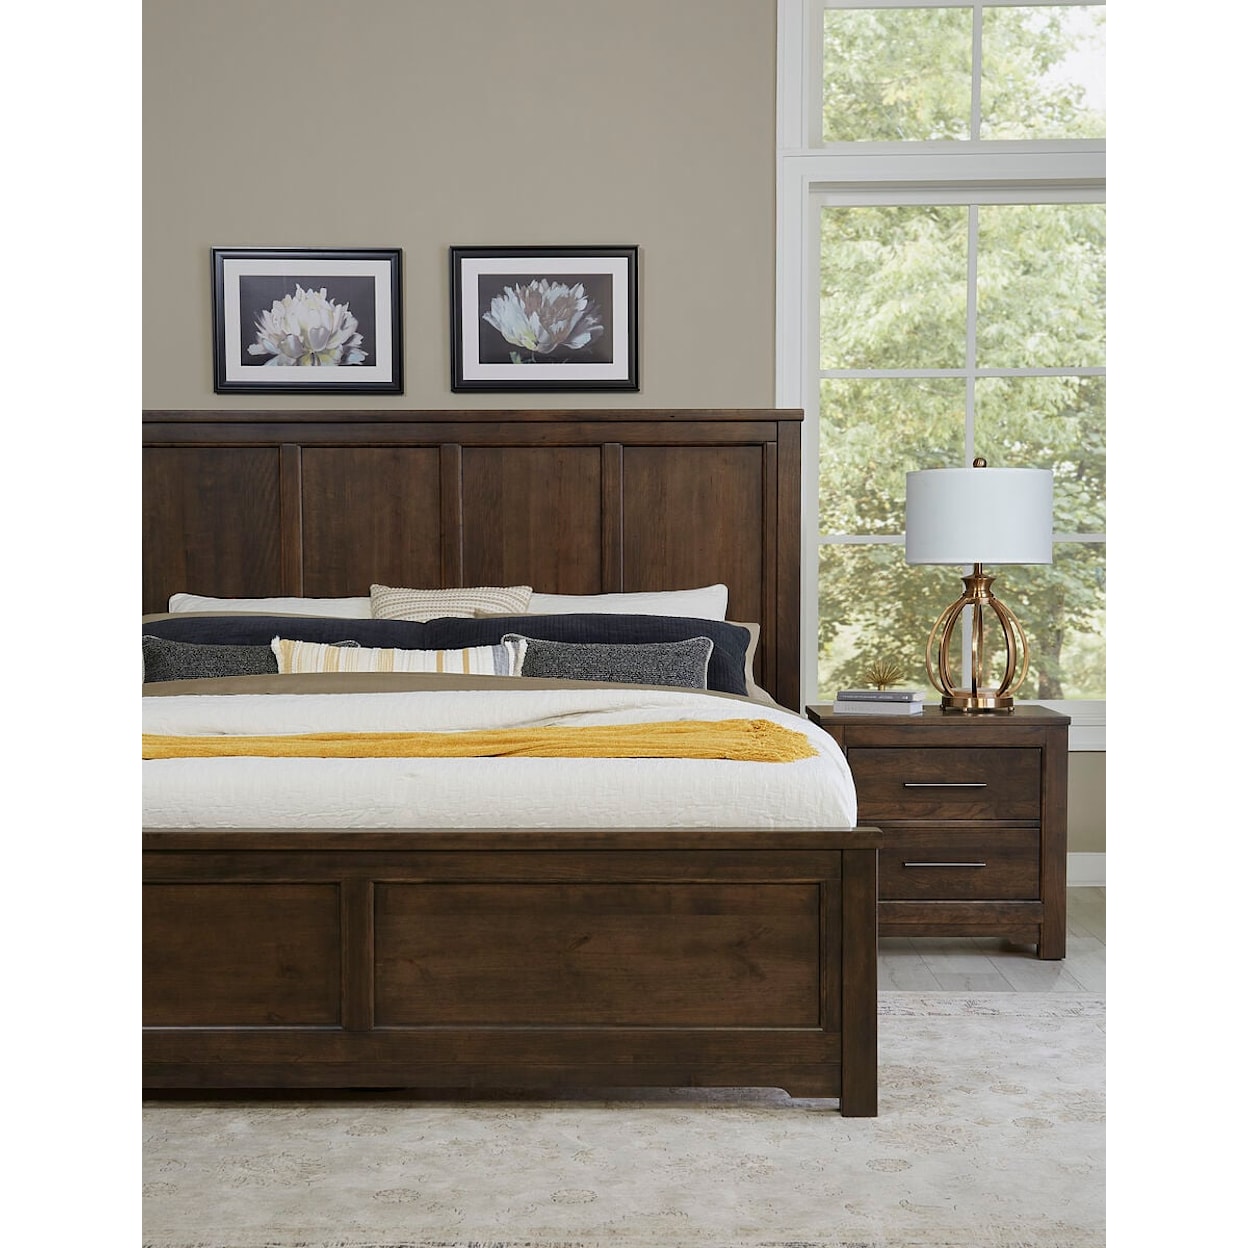 Artisan & Post Crafted Cherry Queen Six Panel Bed